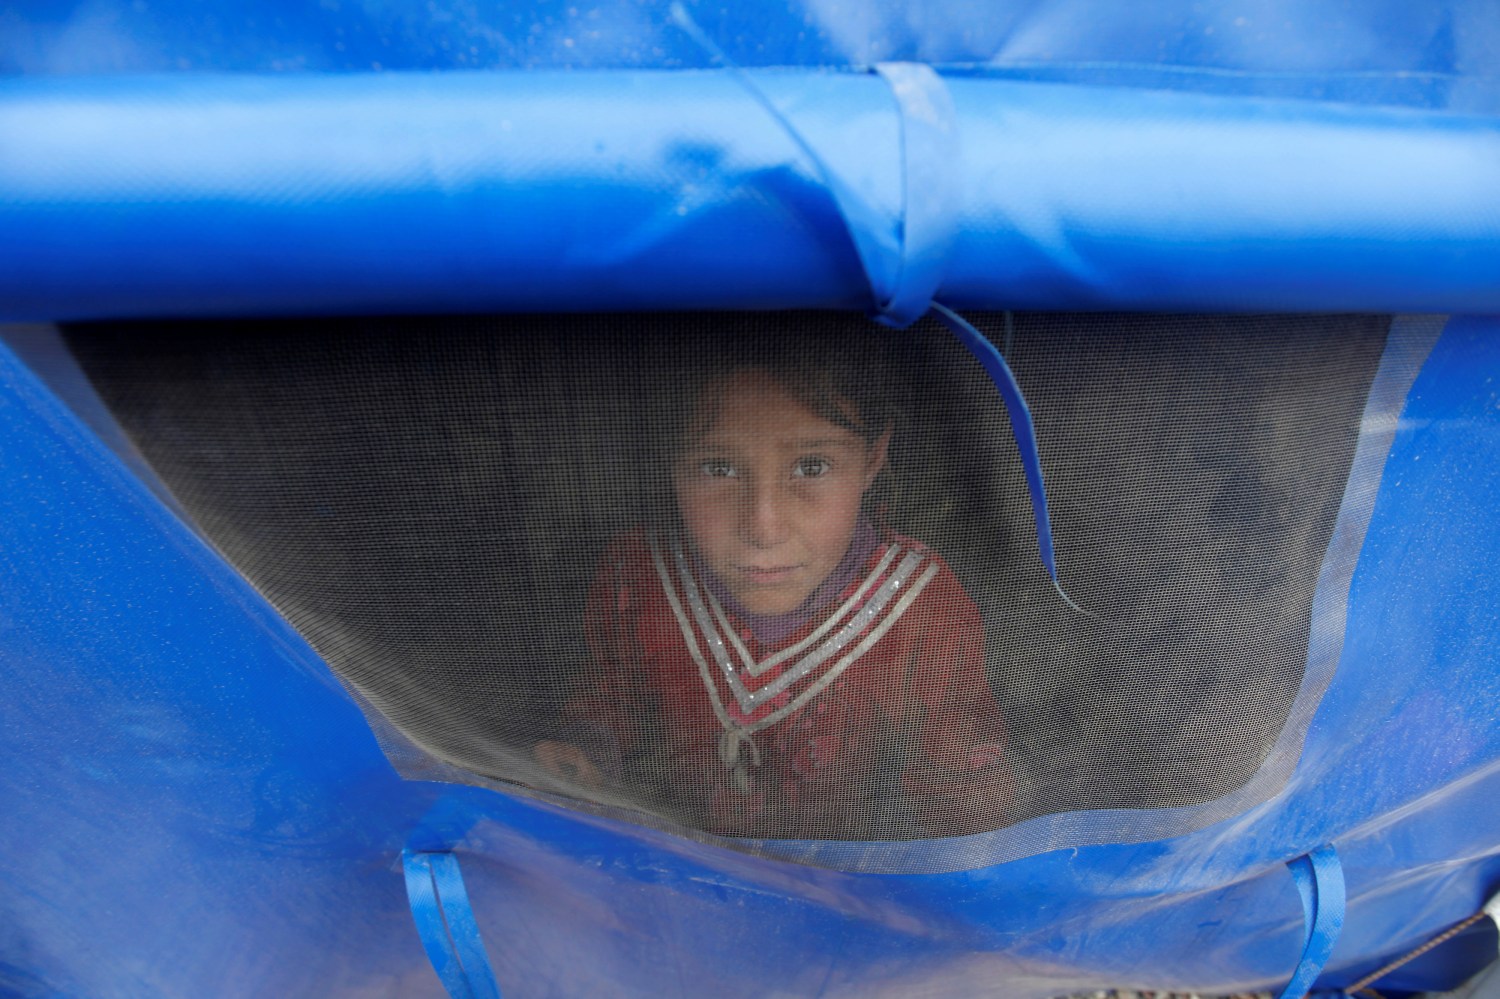 A displaced child who fled her home from al-Mamoun in Mosul, looks through a tent window at a refugee camp, during the battle against Islamic State militants, in Mosul, Iraq, March 2, 2017. REUTERS/Alaa Al-Marjani - RTS116KE